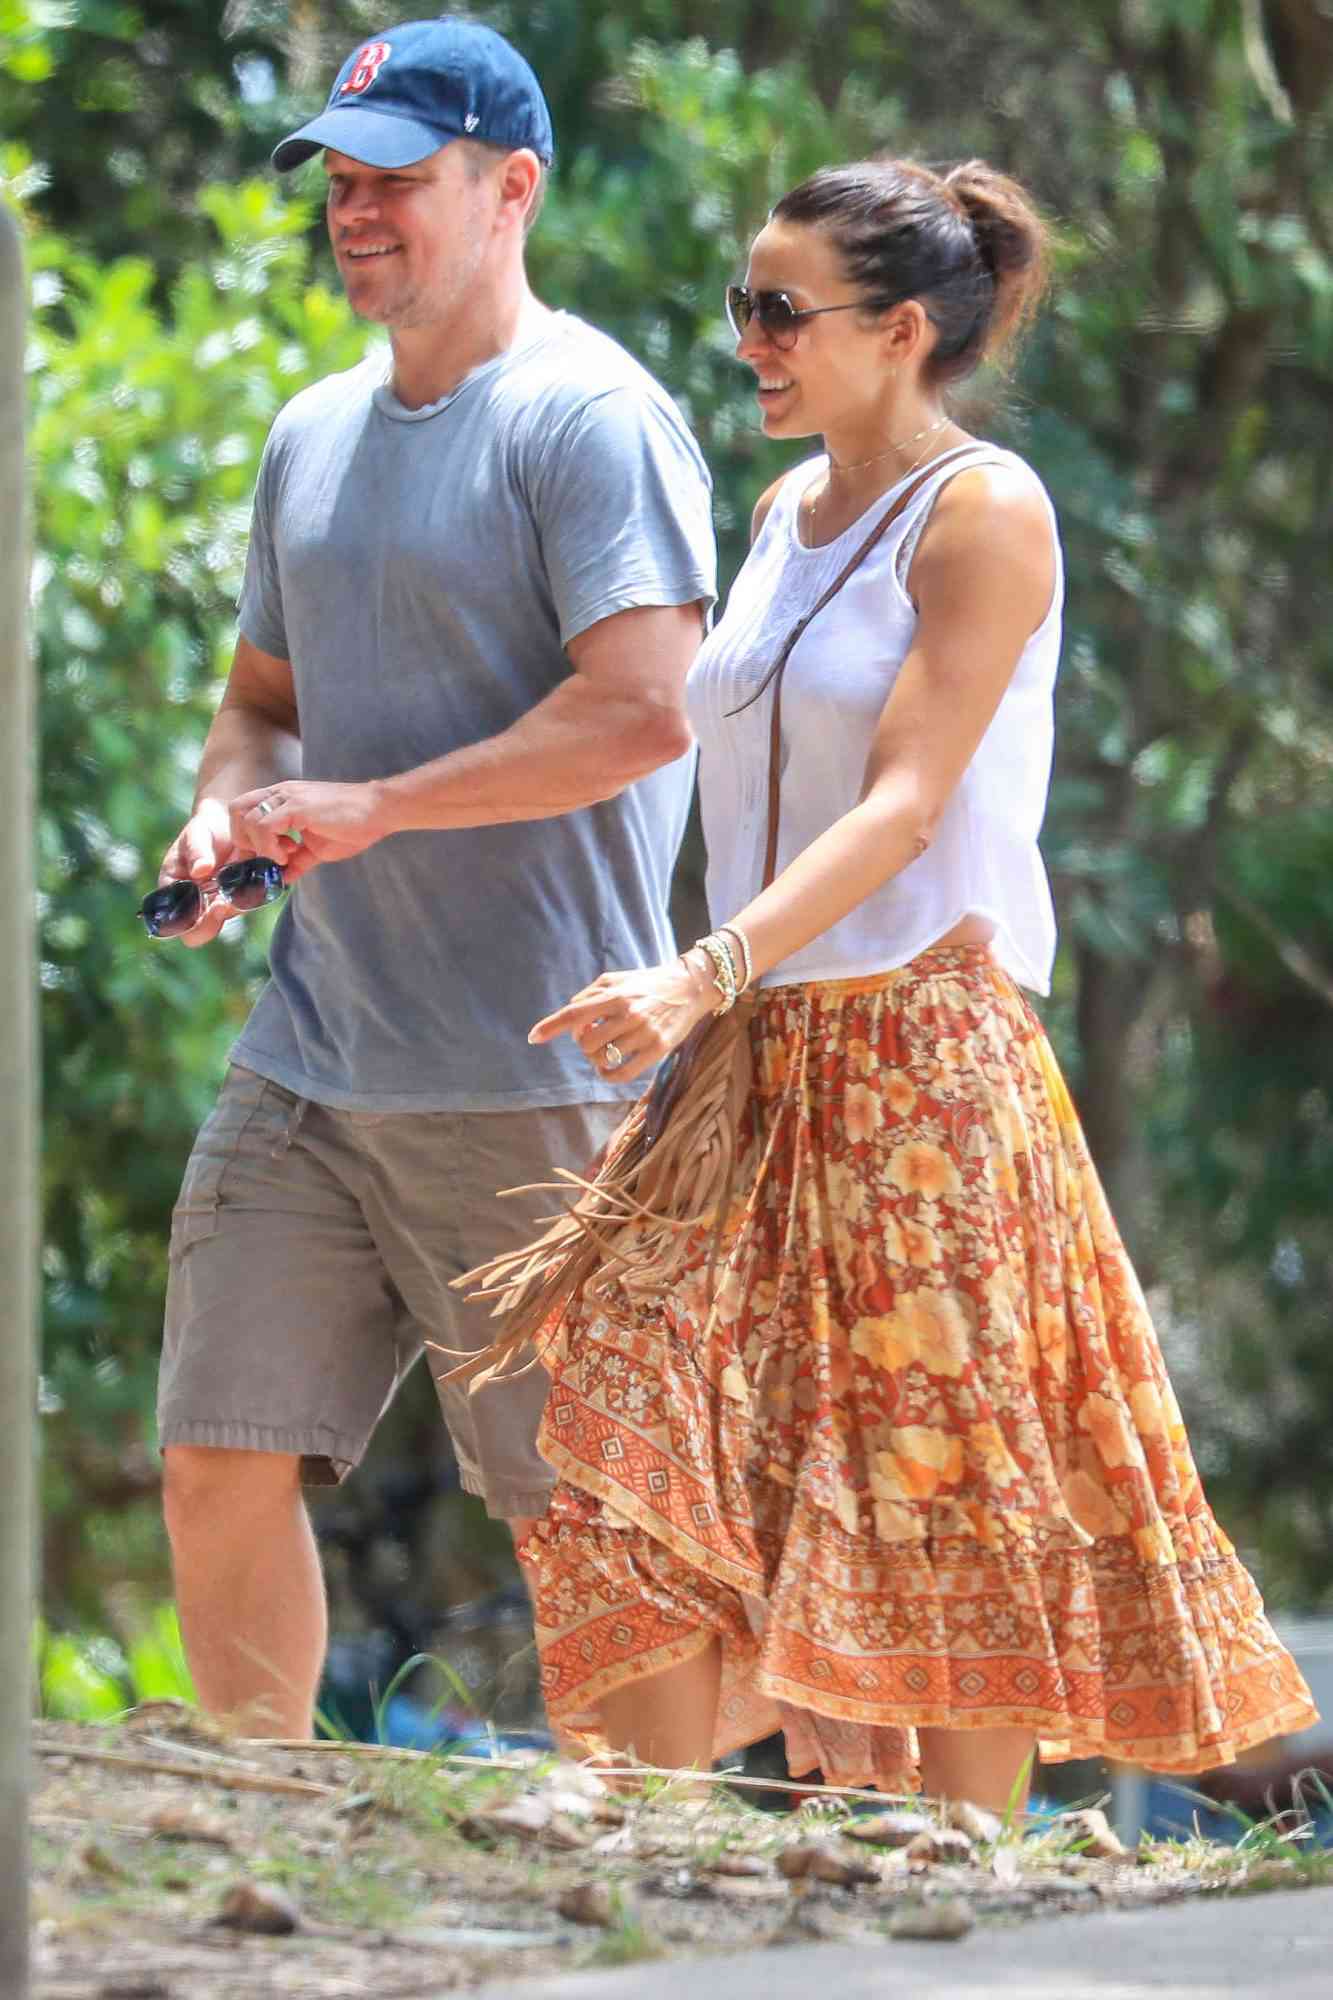 EXCLUSIVE: *NO MAIL ONLINE* Matt Damon And Wife Luciana Barosso Head Out For A Lunch Date In Byron Bay